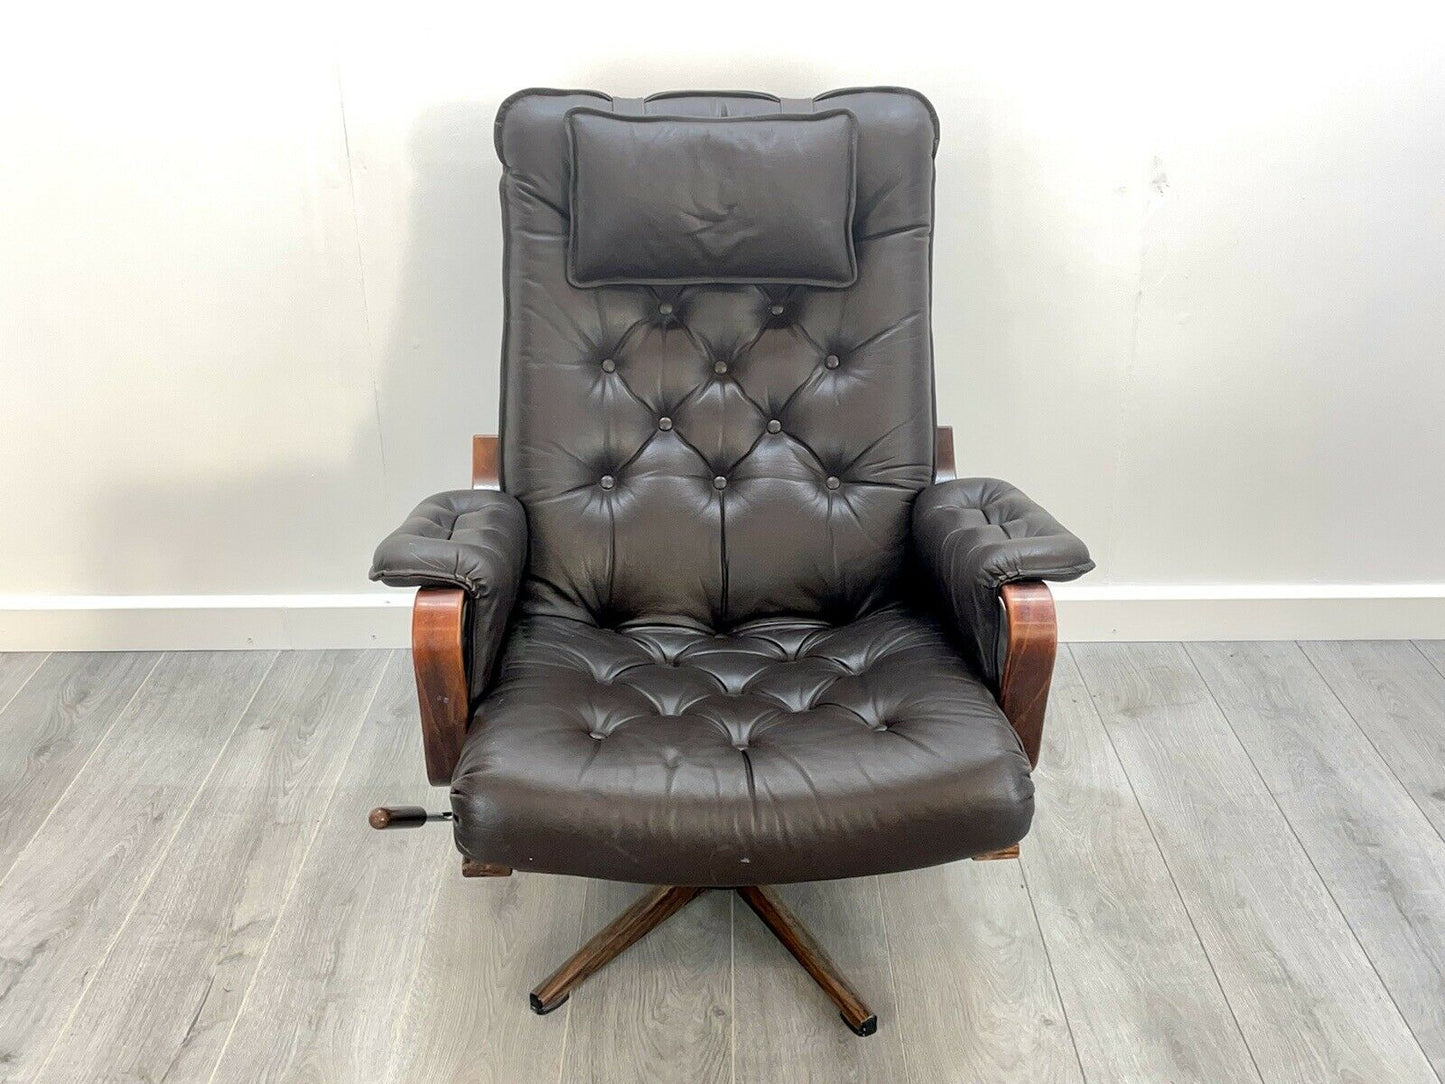 Westnofa Style, Brown Leather Recliner Swivel Chair